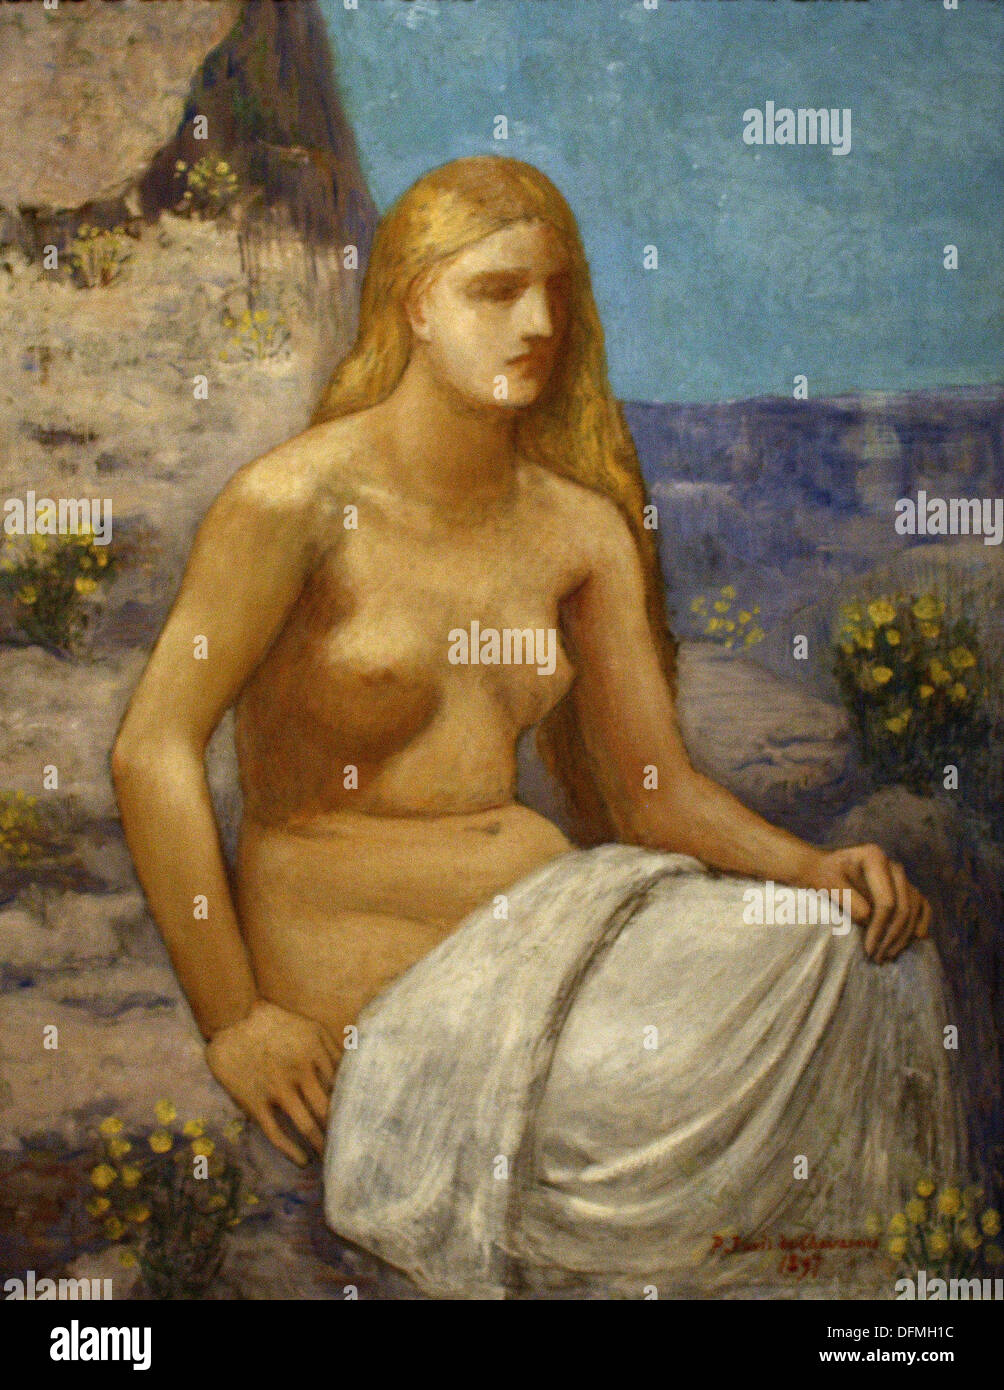 Pierre Puvis de CHAVANNES - Mary Magdalene - 1897 - Museum of Fine Arts - Budapest, Hungary. Stock Photo